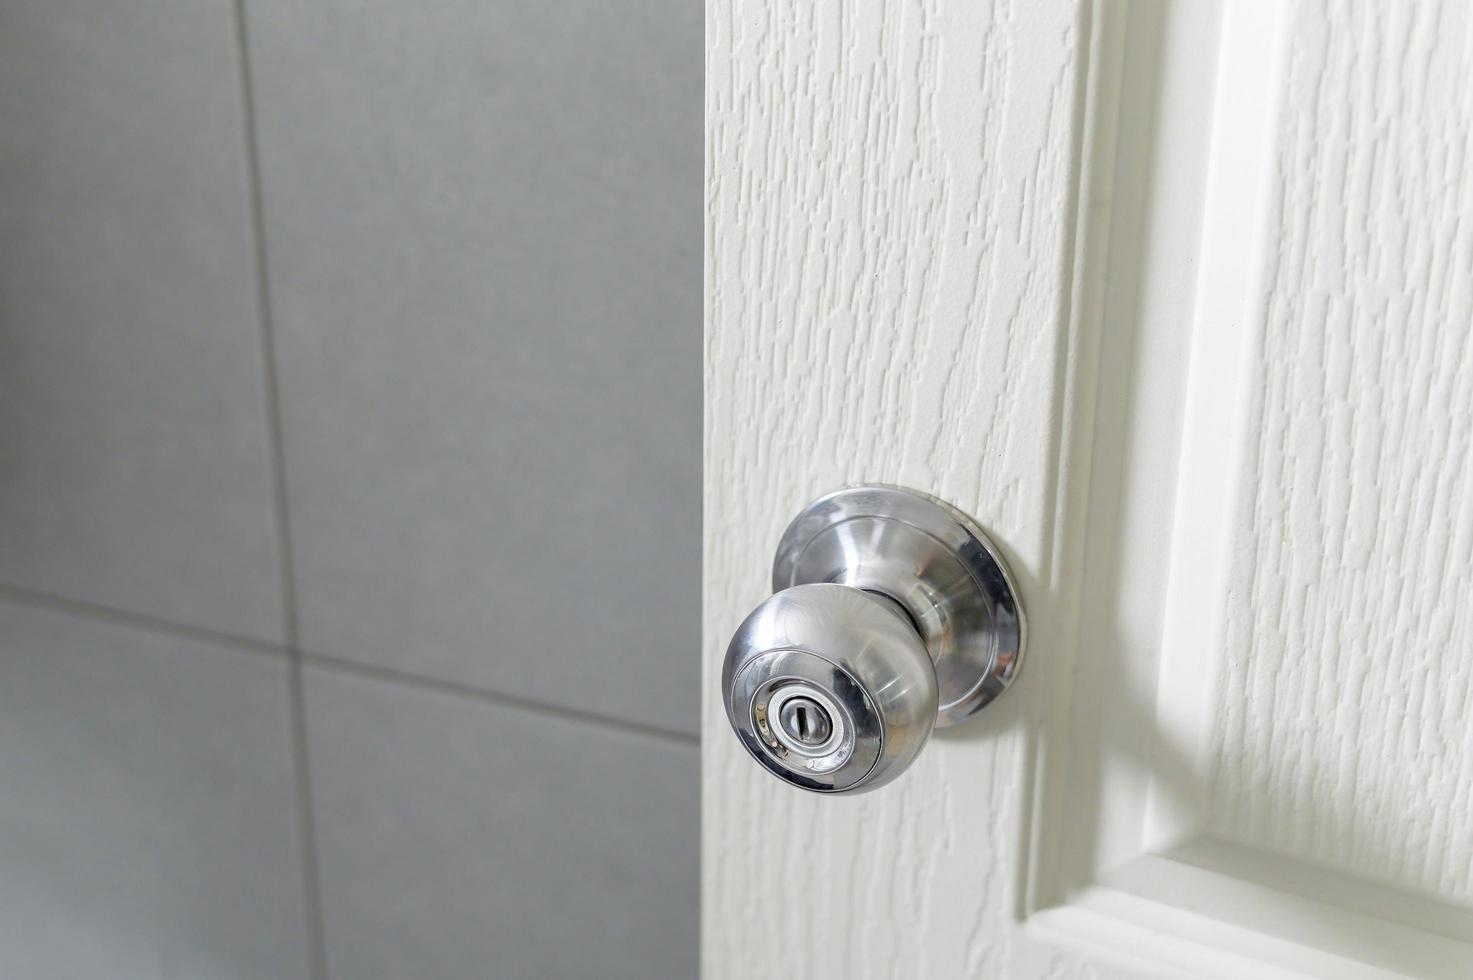 Roundly door knob lock handle home security close. The doorknob is being found that caused the COVID 19 infection. photo